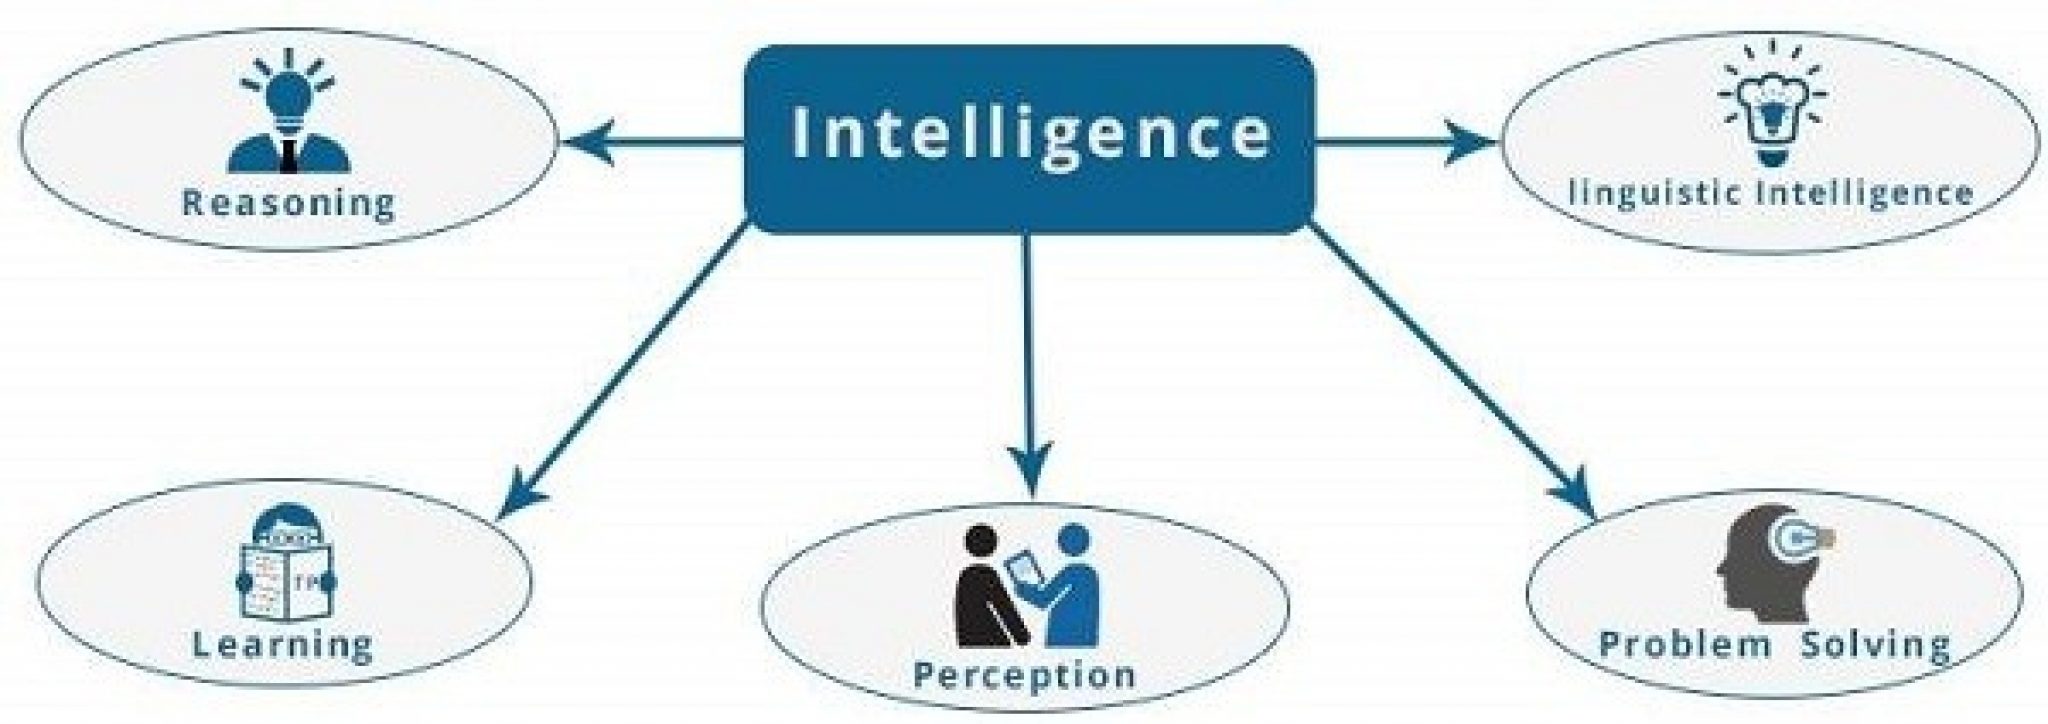 Intelligence Systems. What is Intelligence. Искусственный интеллект chat GPT. Artificial Linguistic environment.